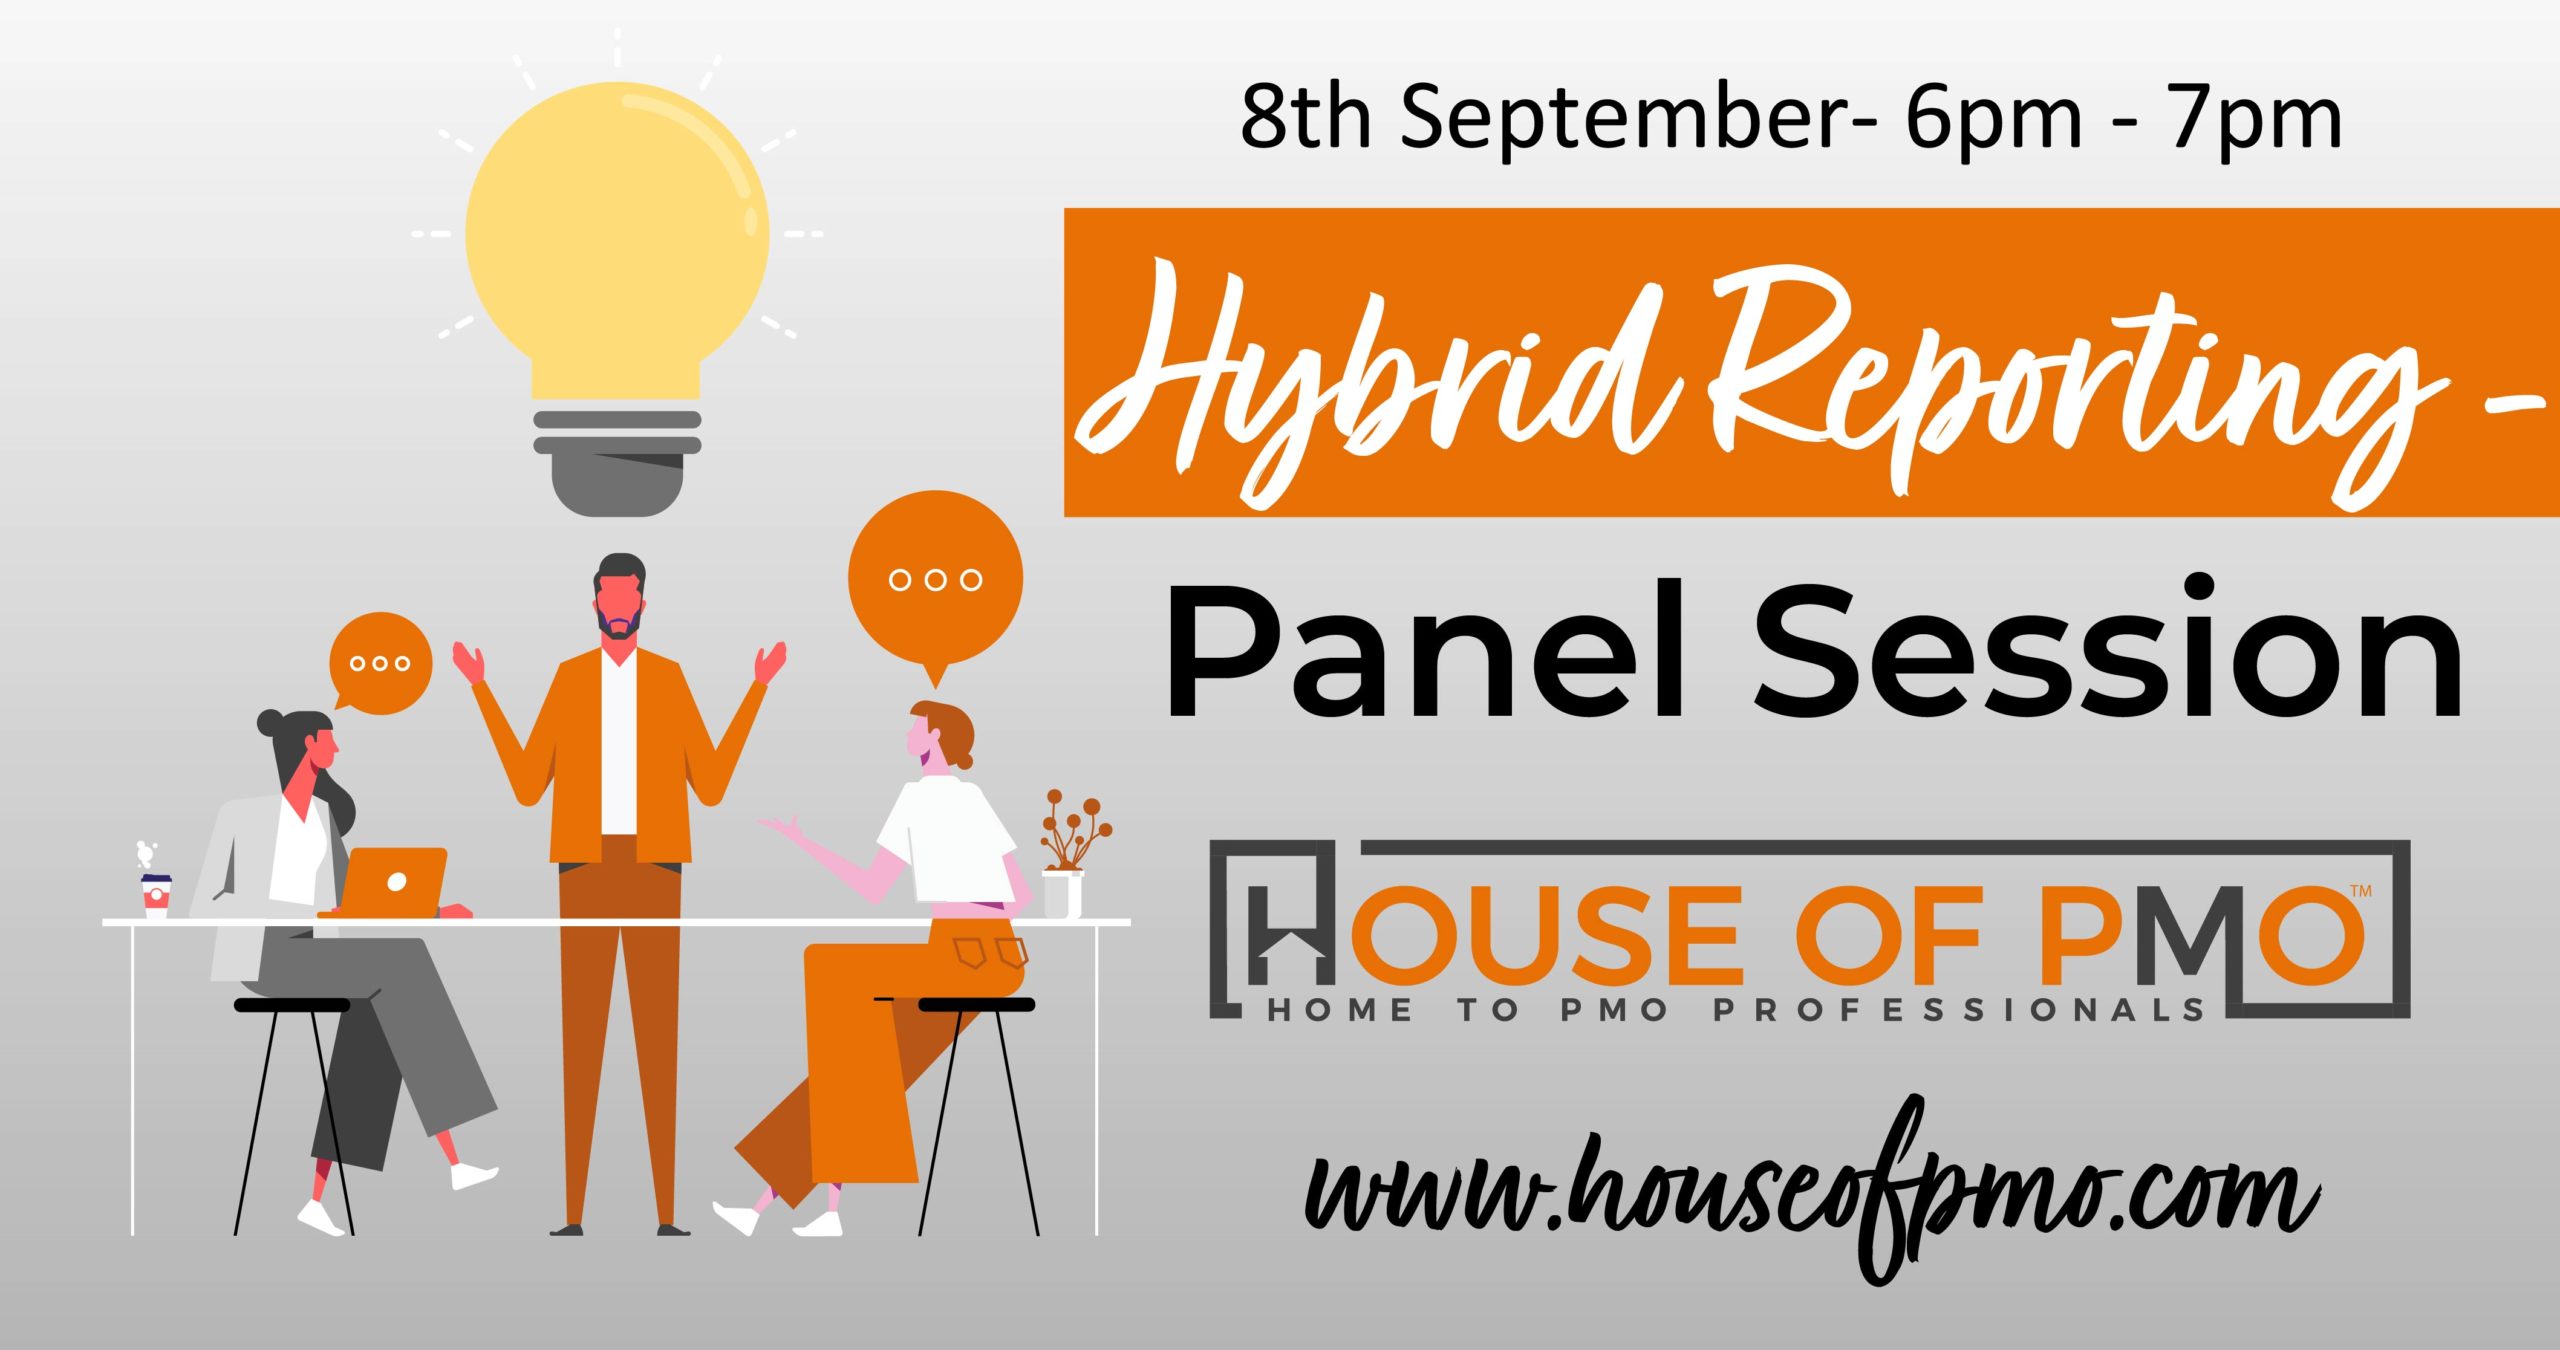 Image for the house of PMO event hybrid reporting- panel session. It will be on the 8th of September from 6pm to 7pm